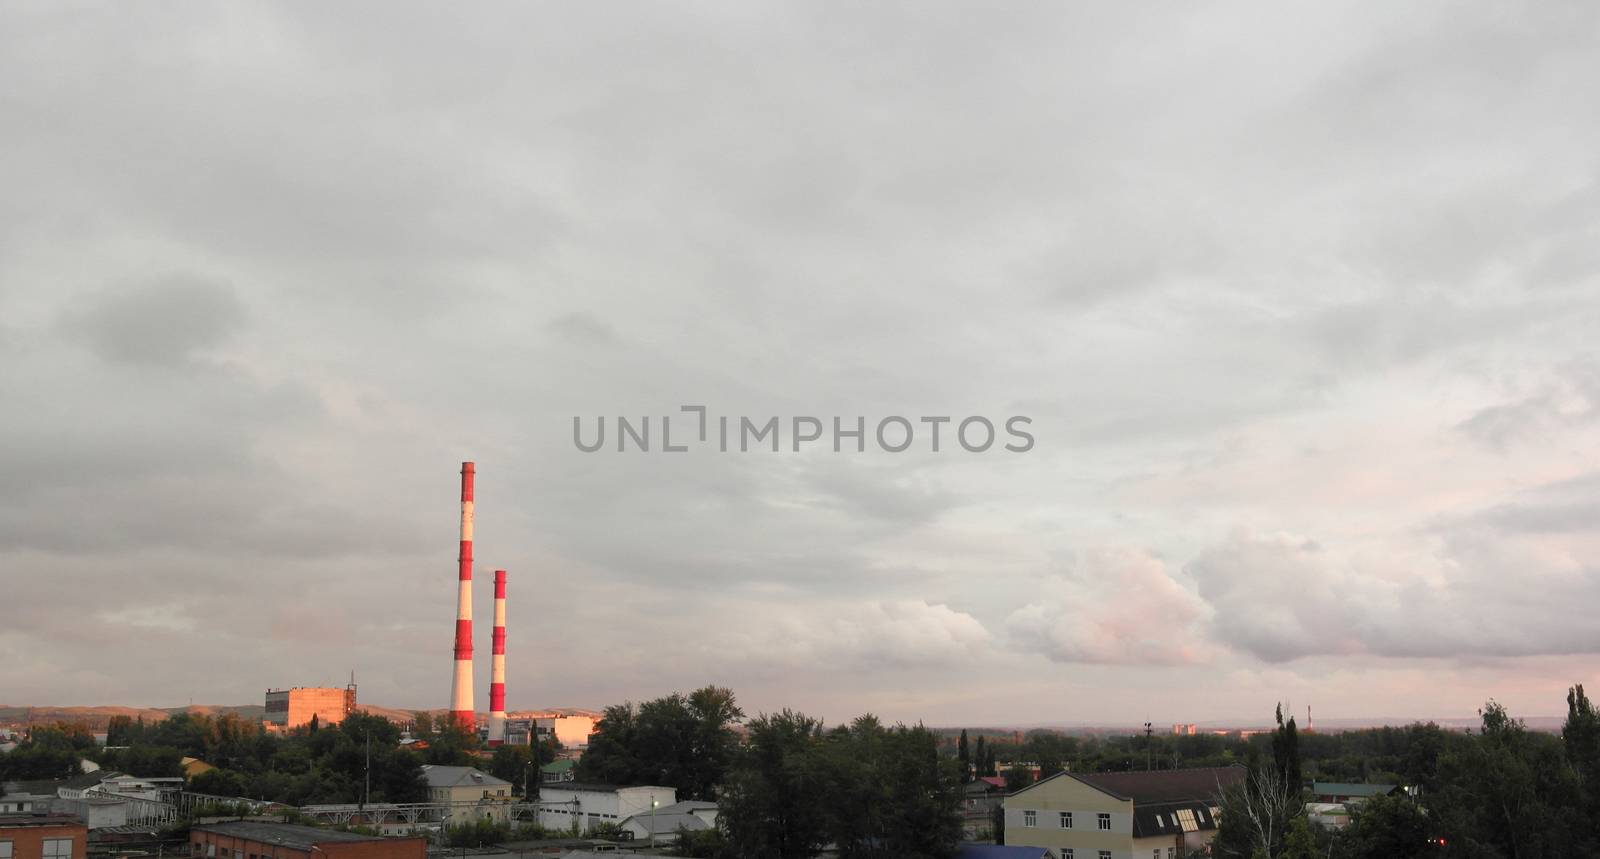 Evening industrial landscape with factory chimneys